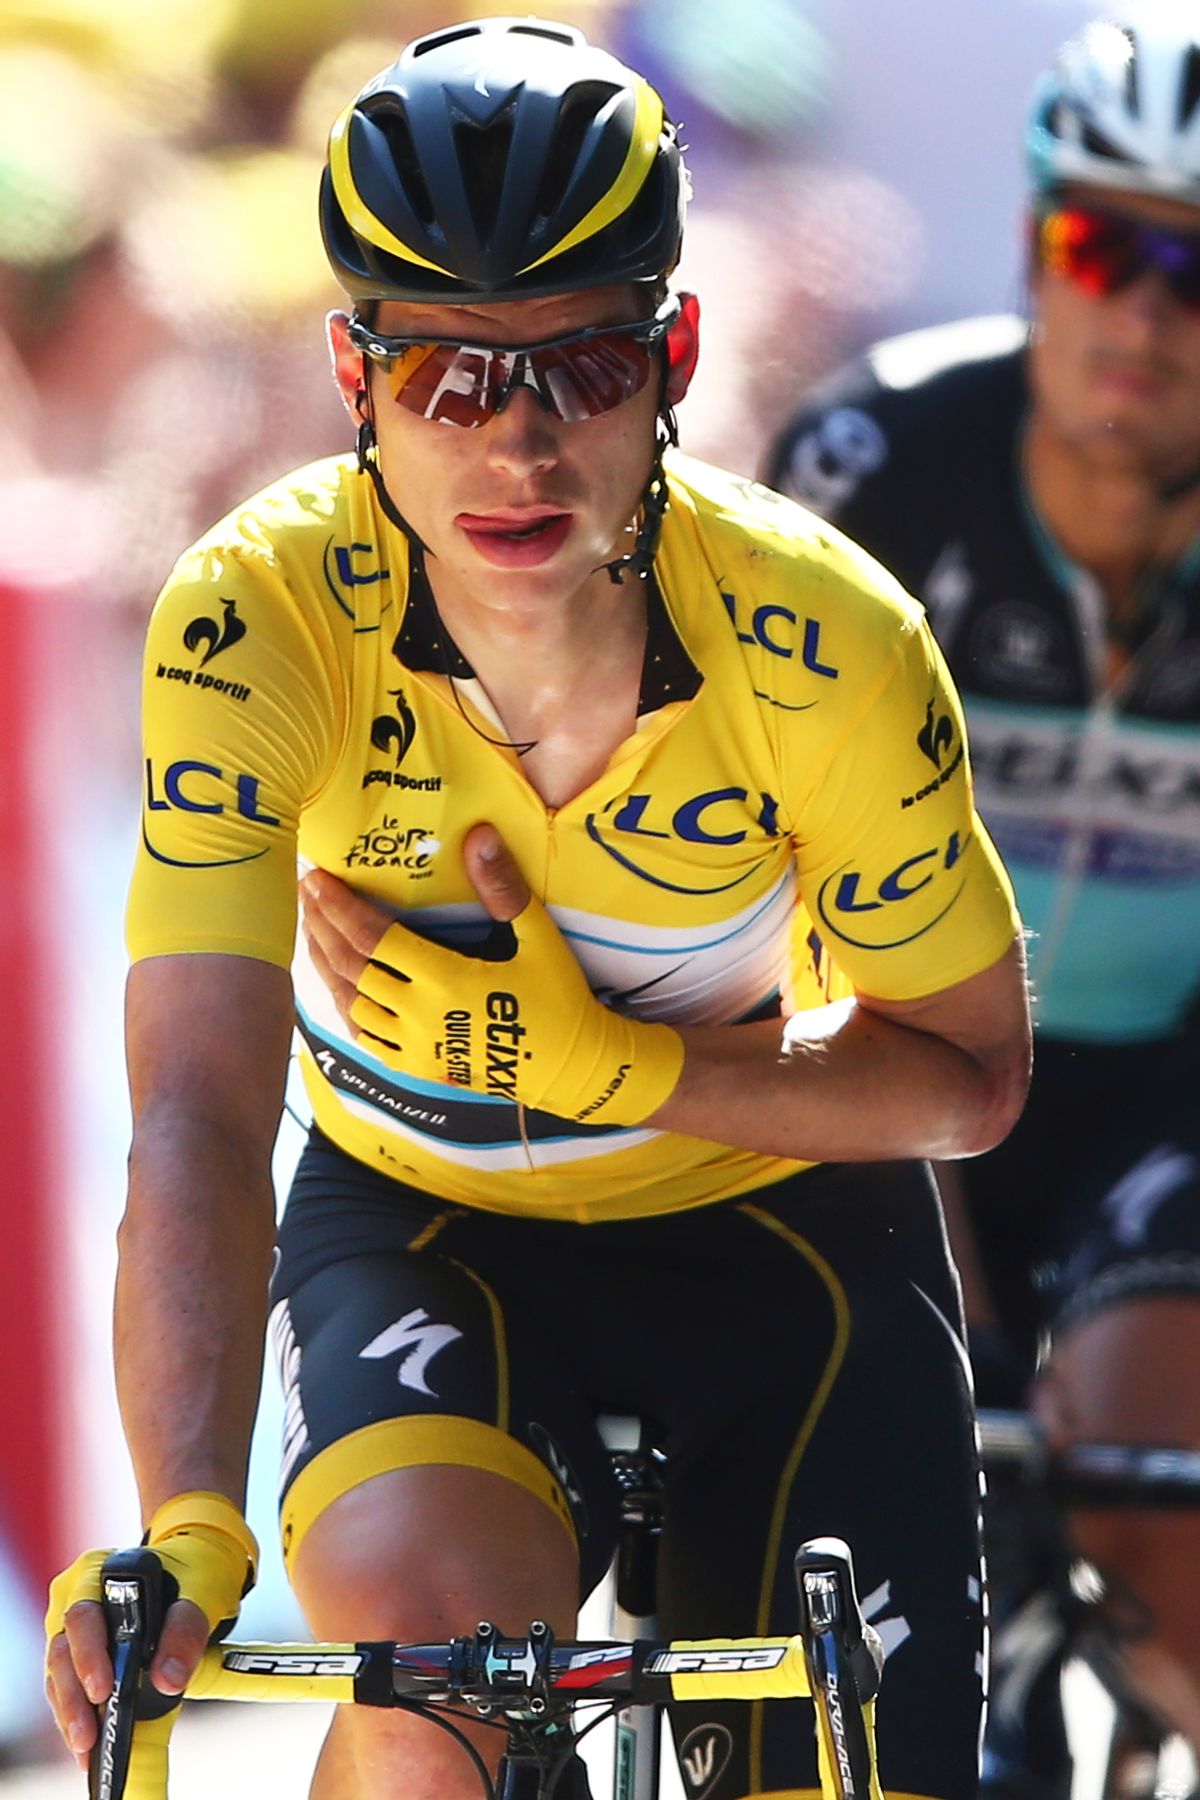 Germany's Tony Martin, wearing the overall leader's yellow jersey, holds his arm in a position which stabilizes his shoulder and collar bone as he crosses the finish line of the sixth stage of the Tour de France cycling race over 191.5 kilometers (119 miles) with start in Abbeville and finish in Le Havre, France, Thursday, July 9, 2015.(AP Photo/Peter Dejong)  (Peter Dejong)